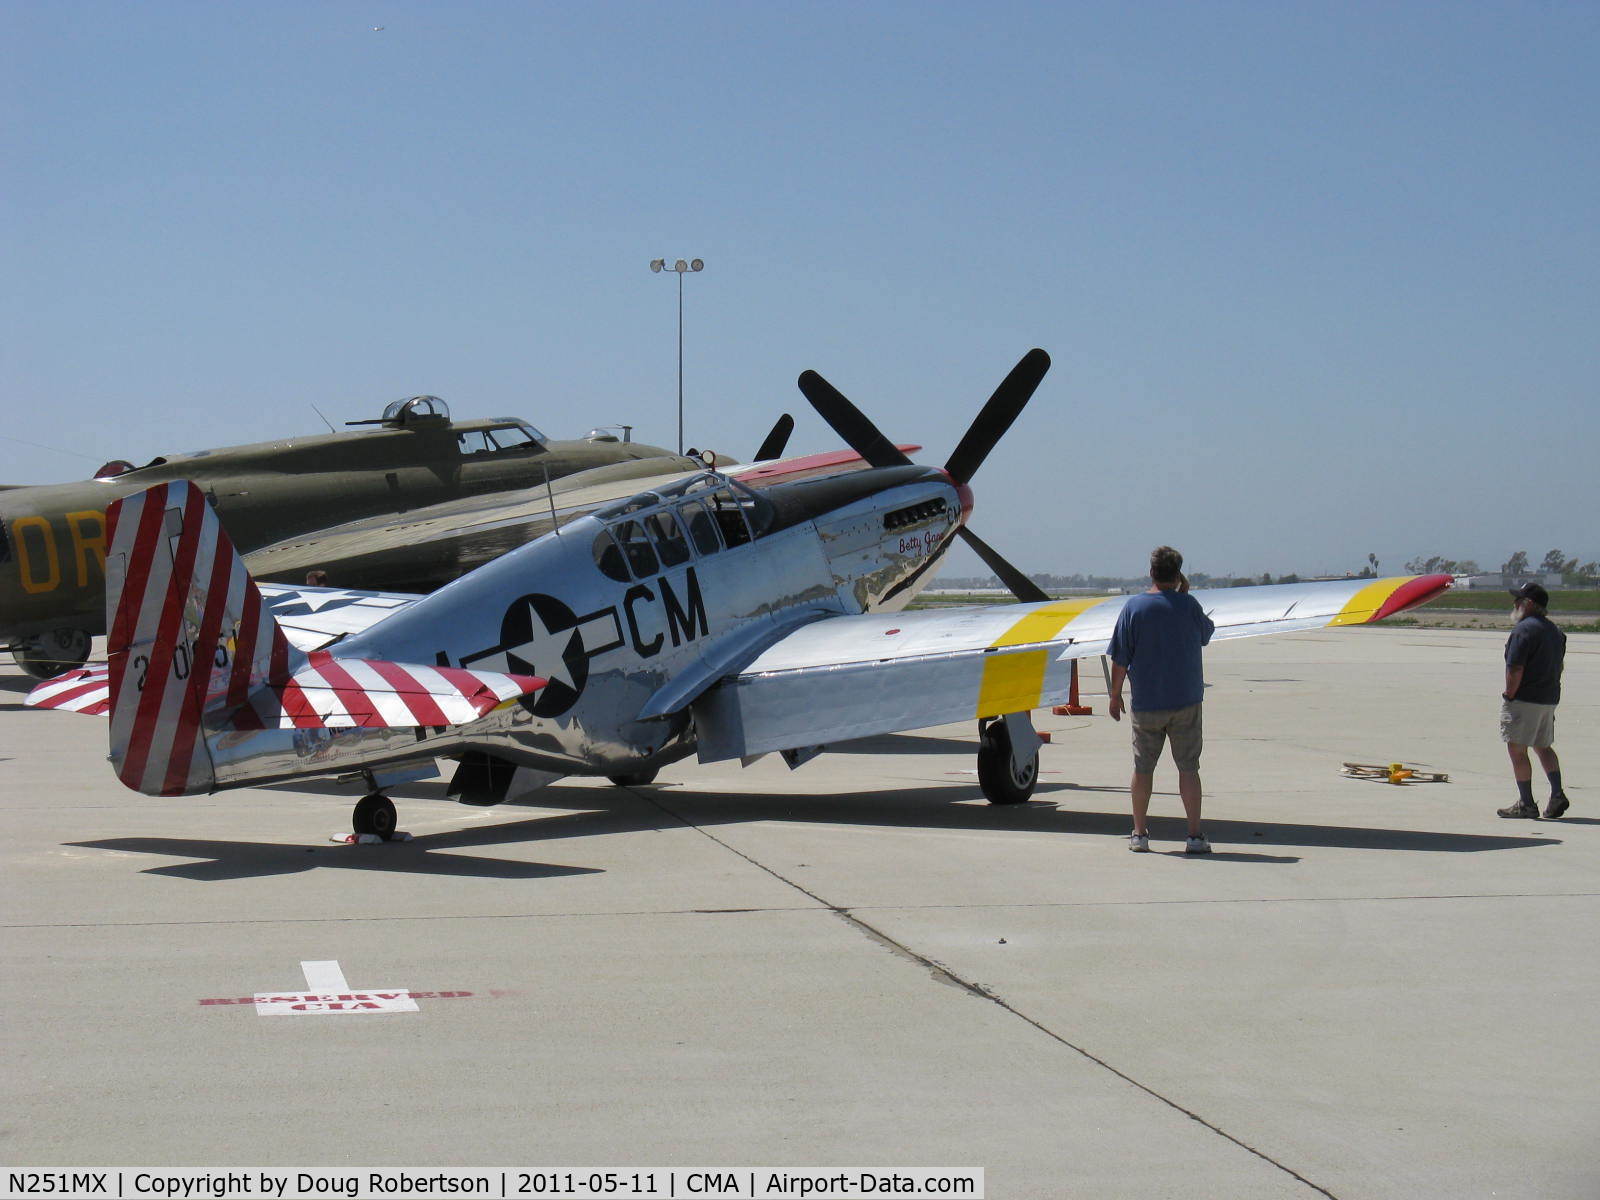 N251MX, 1943 North American P-51C-10 Mustang C/N 103-22730, 1943 North American TP-51C-10 MUSTANG as NL251MX 'Betty Jane', Packard Liberty/RR V-1650-3 1,380 Hp, modified for tandem dual control. Limited class